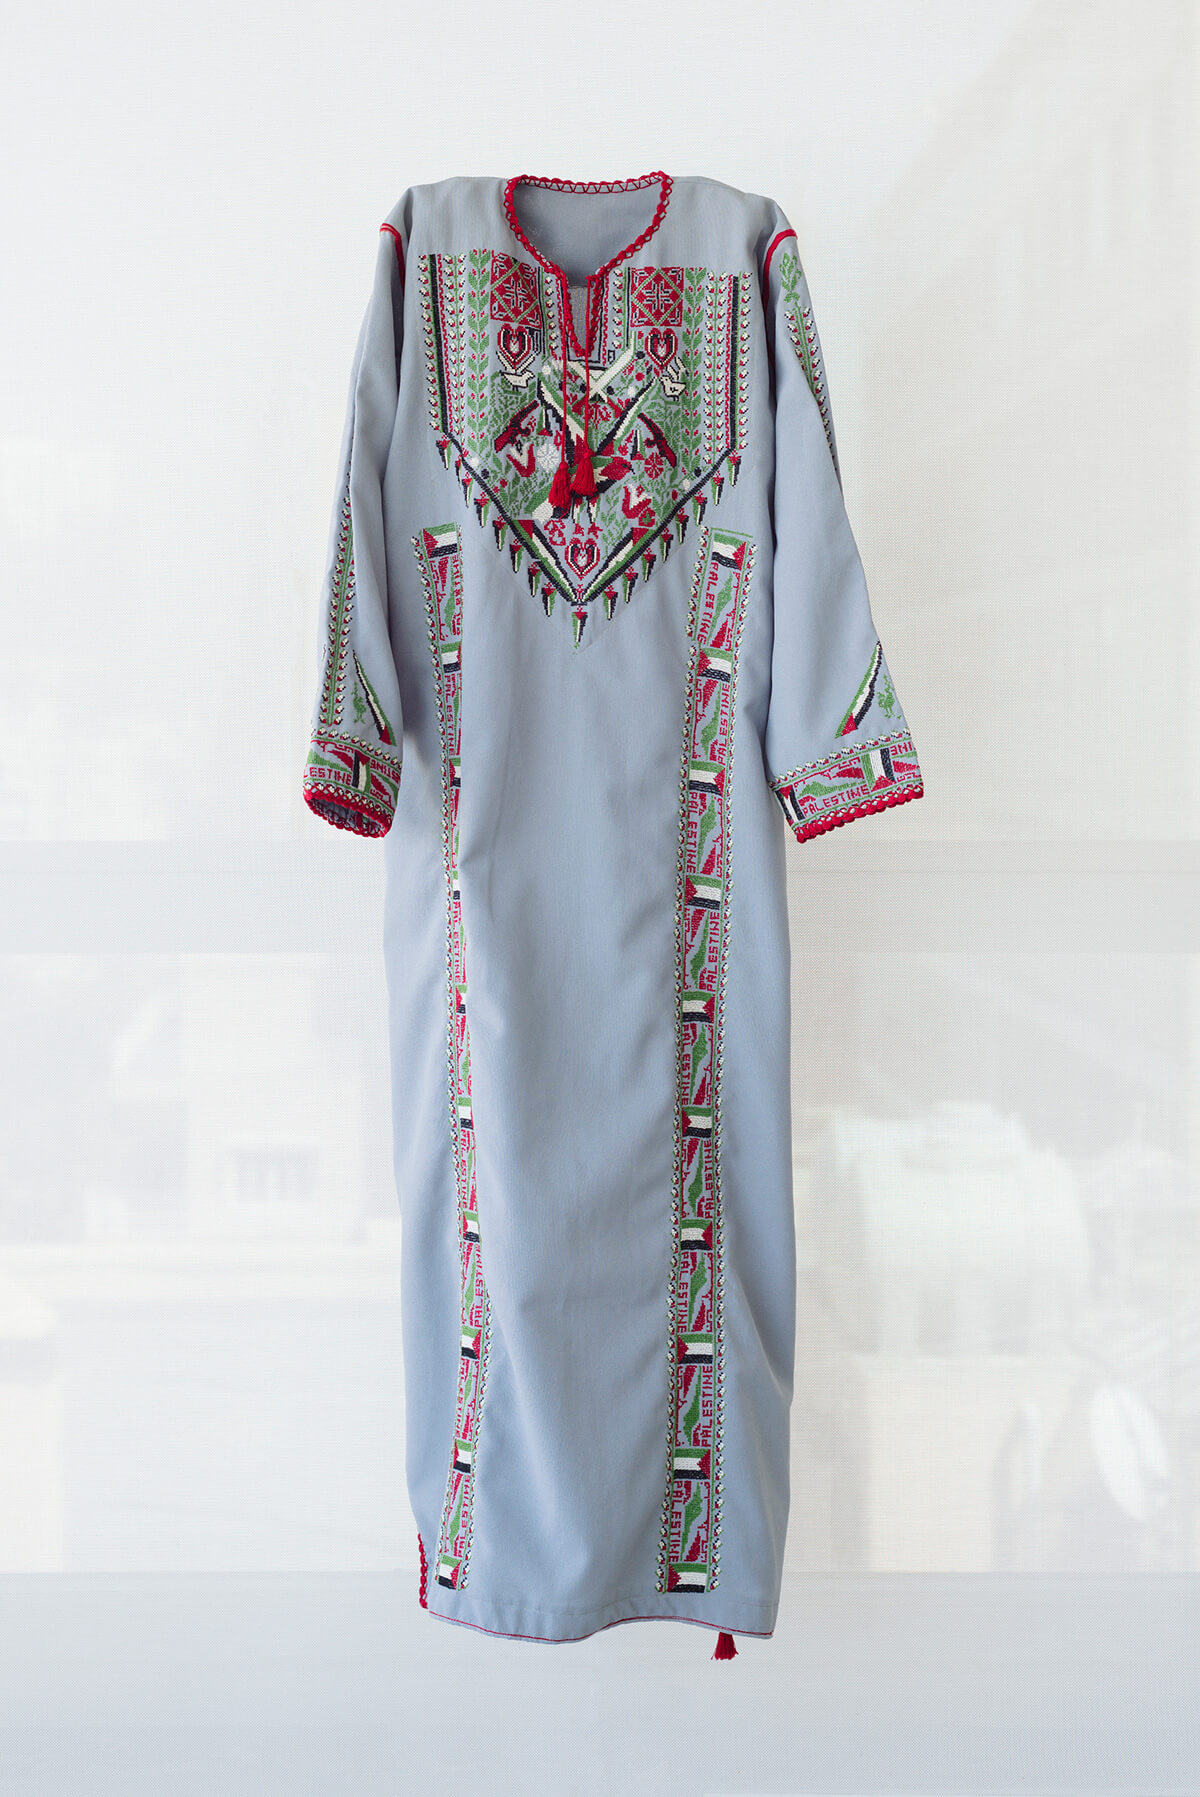 Intifada dress, 1987-1993, from the collection of Tiraz: Widad Kawar Home for Arab Dress, photos Tanya Traboulsi for the Palestinian Museum. 